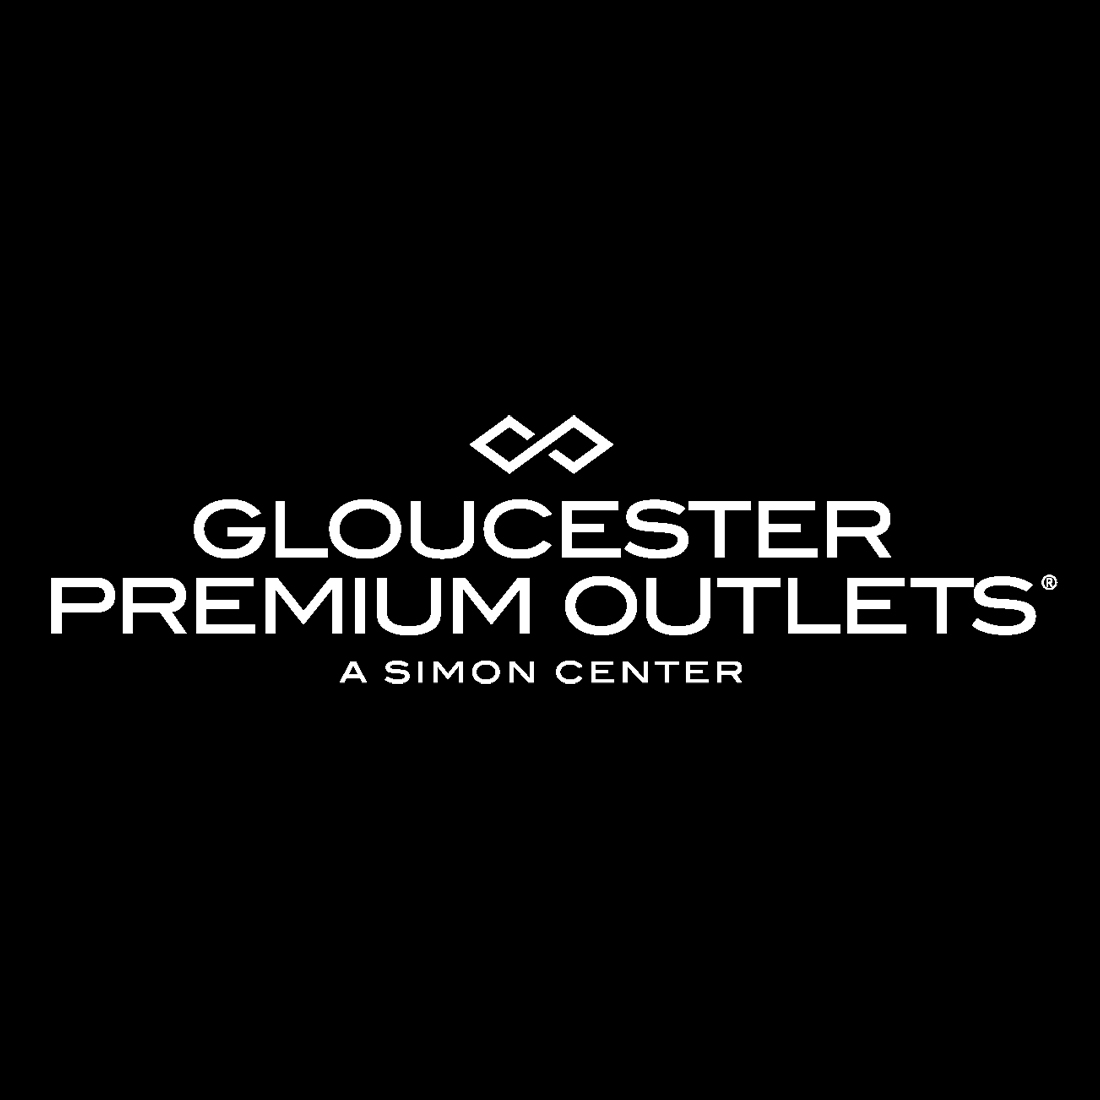 Gloucester Premium Outlets Coupons near me in Blackwood, NJ 08012 | 8coupons